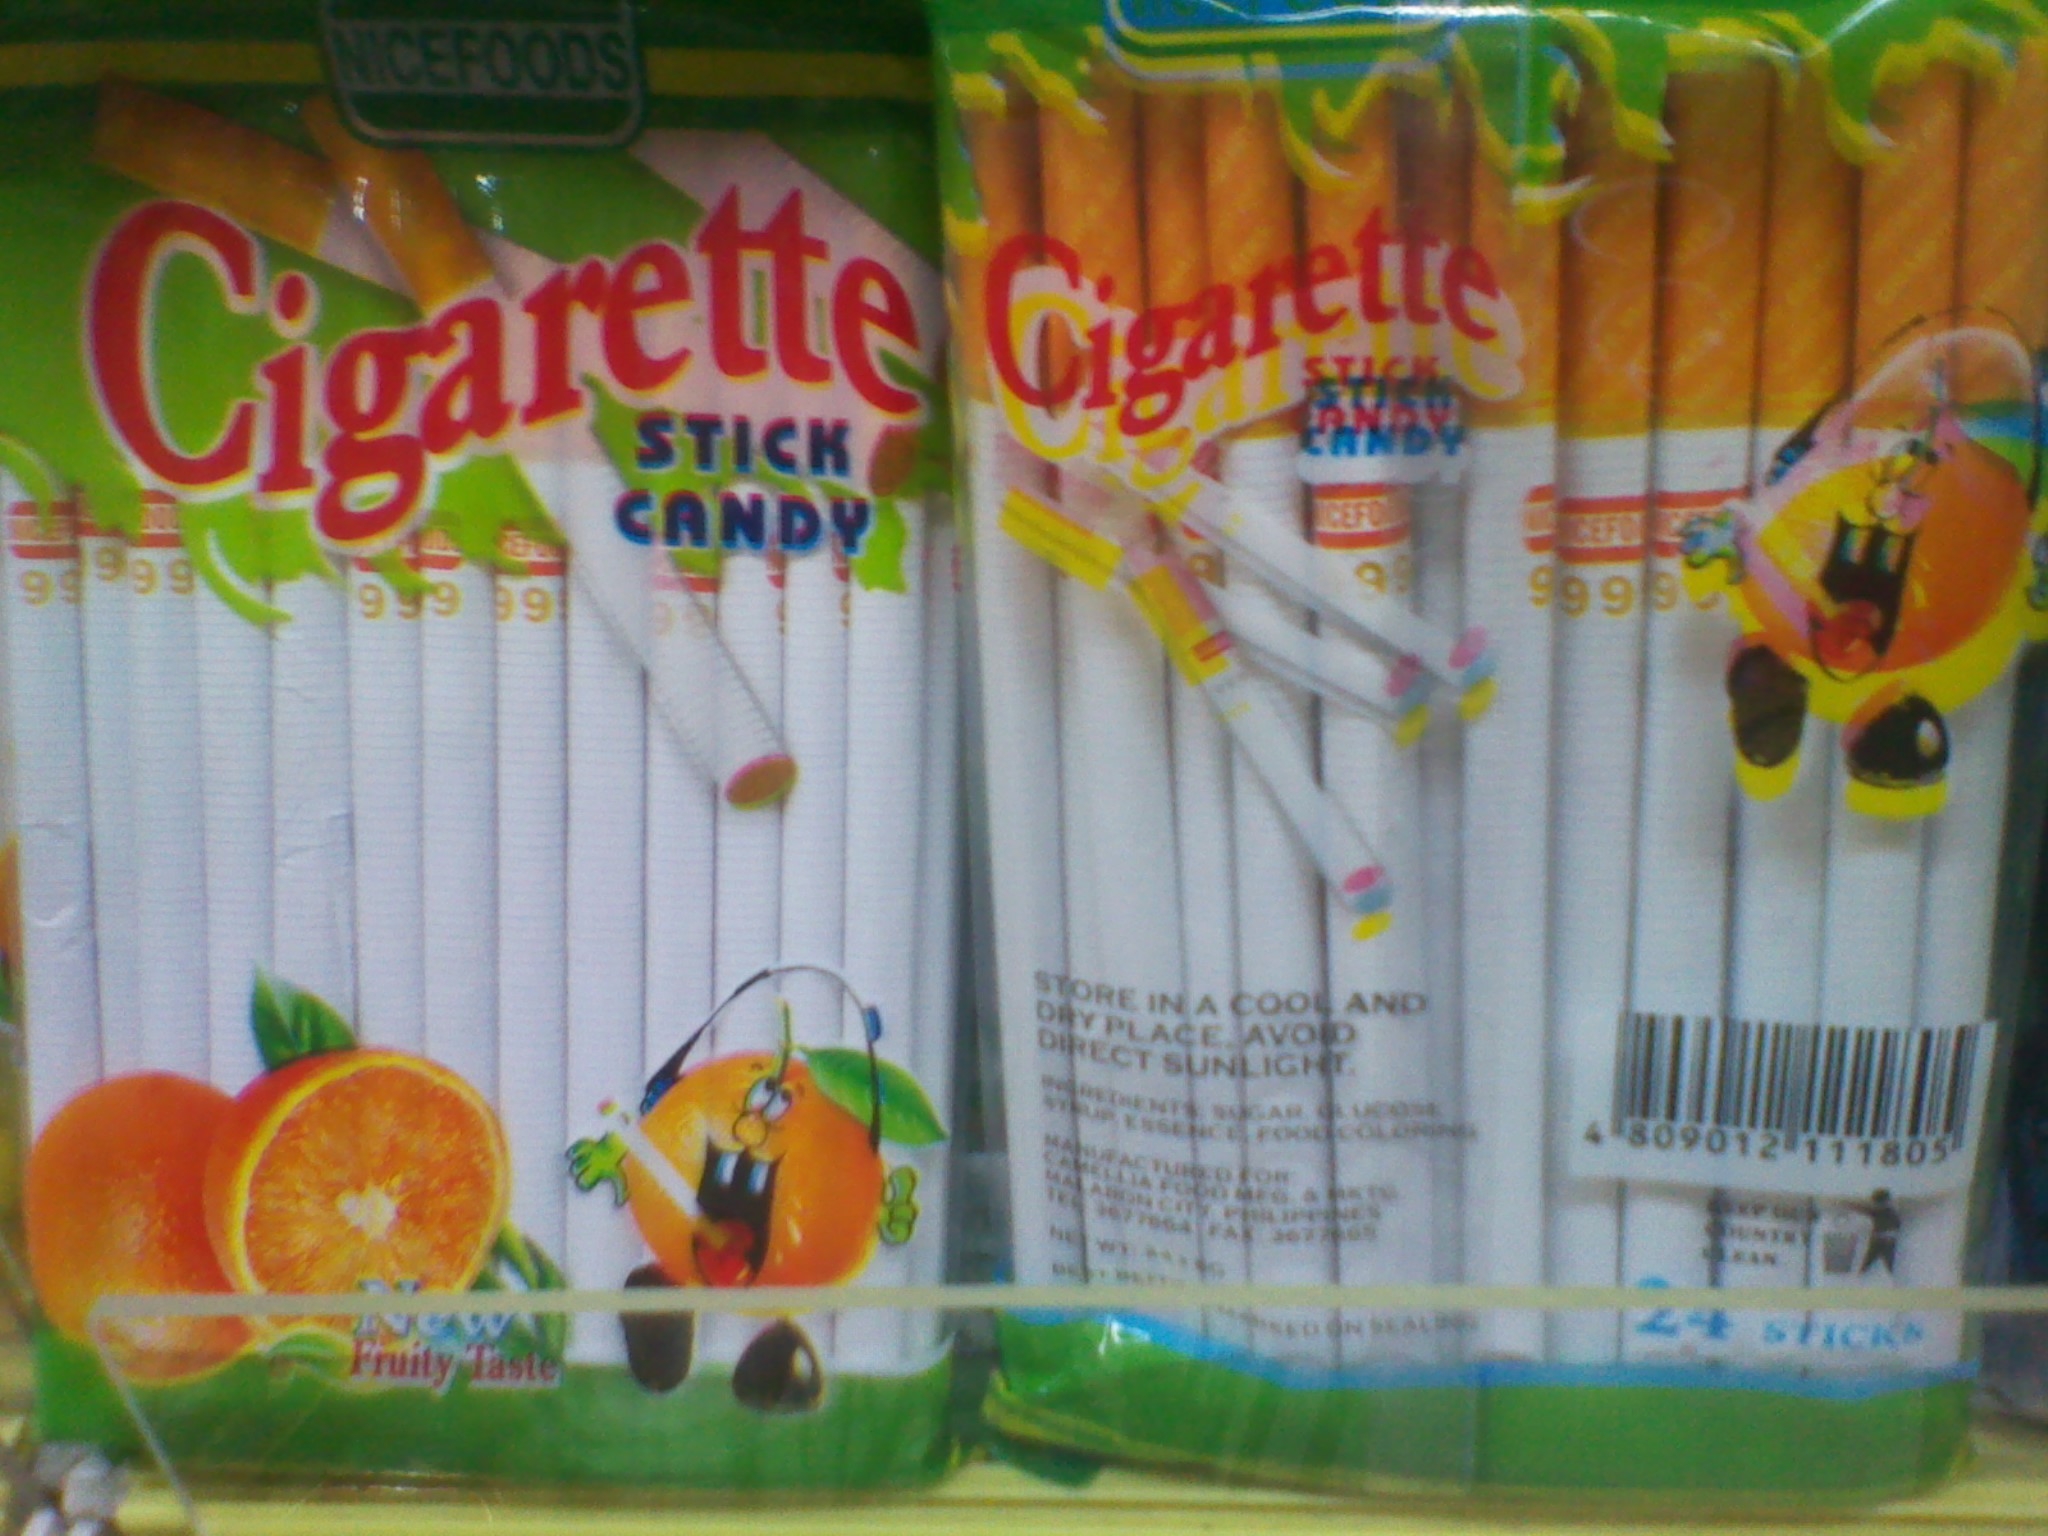 SMOKING CANDY CIGARETTES